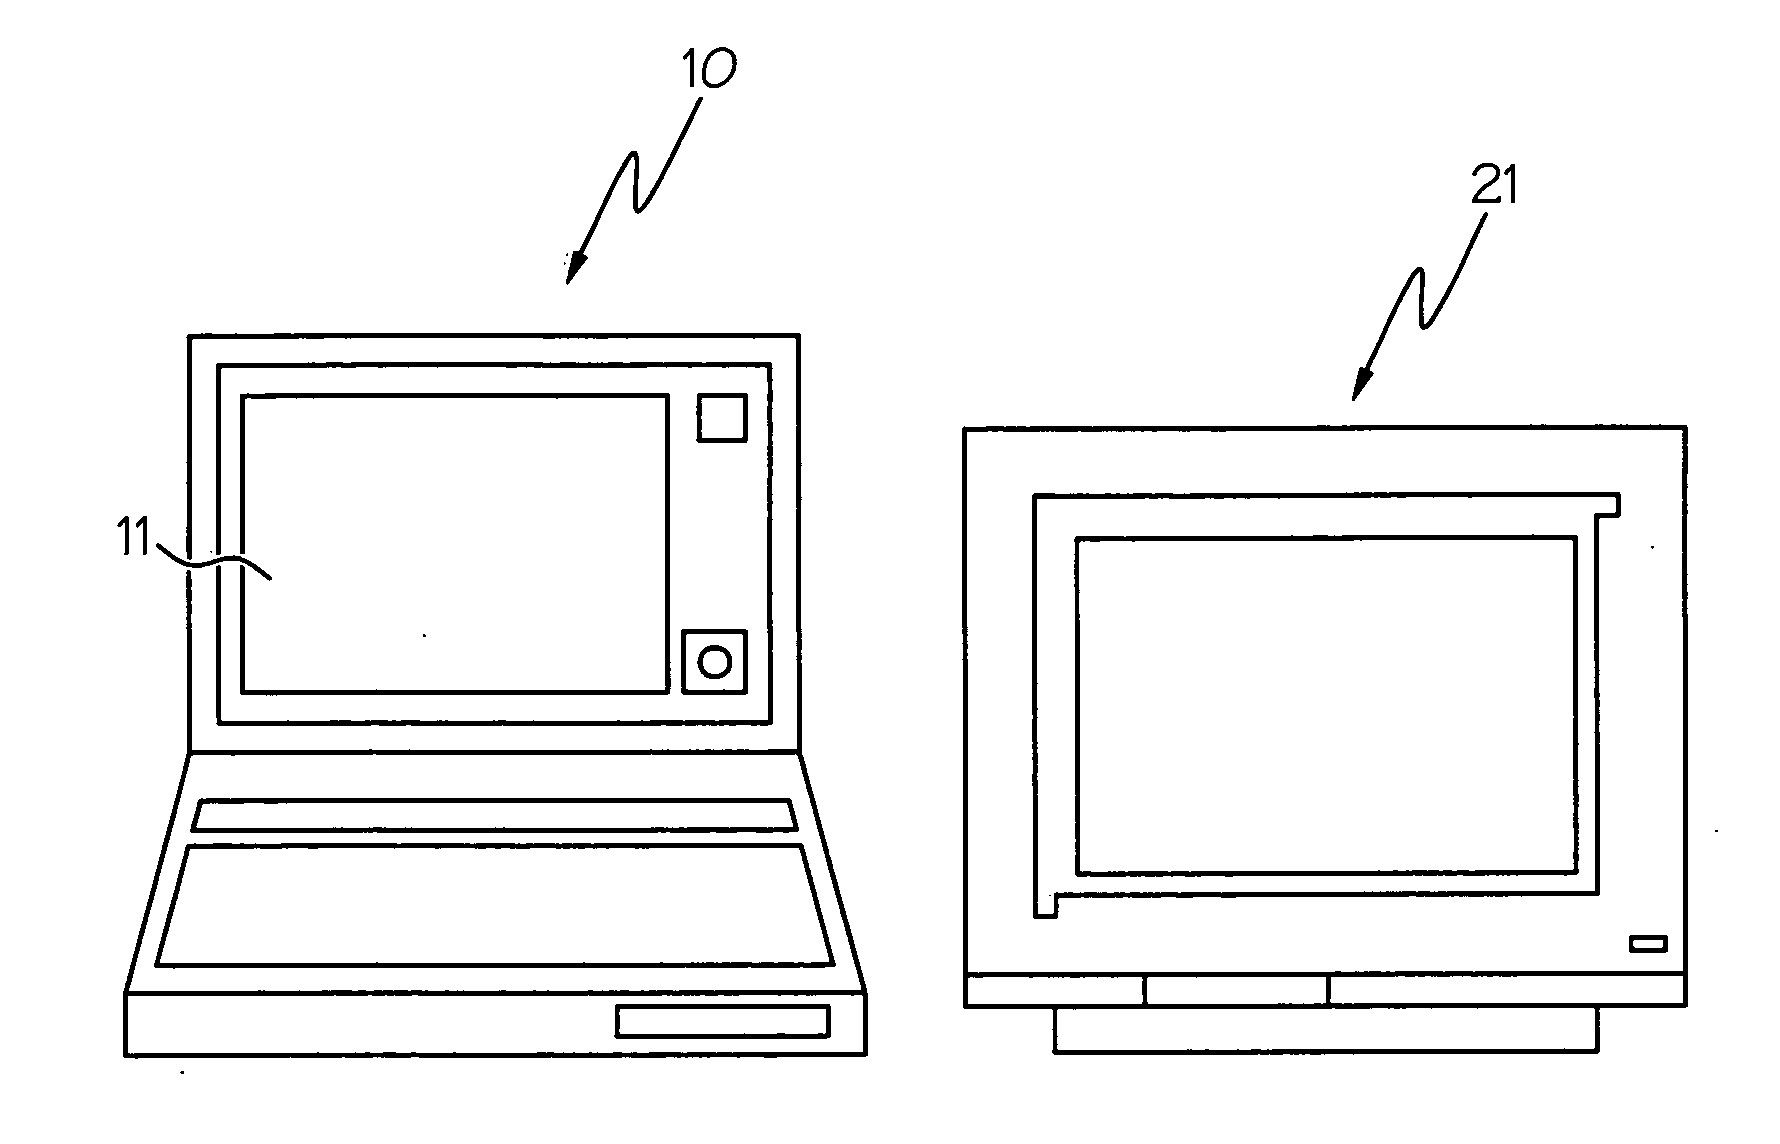 System and method for implementing a multi-monitor interface for a data processing system